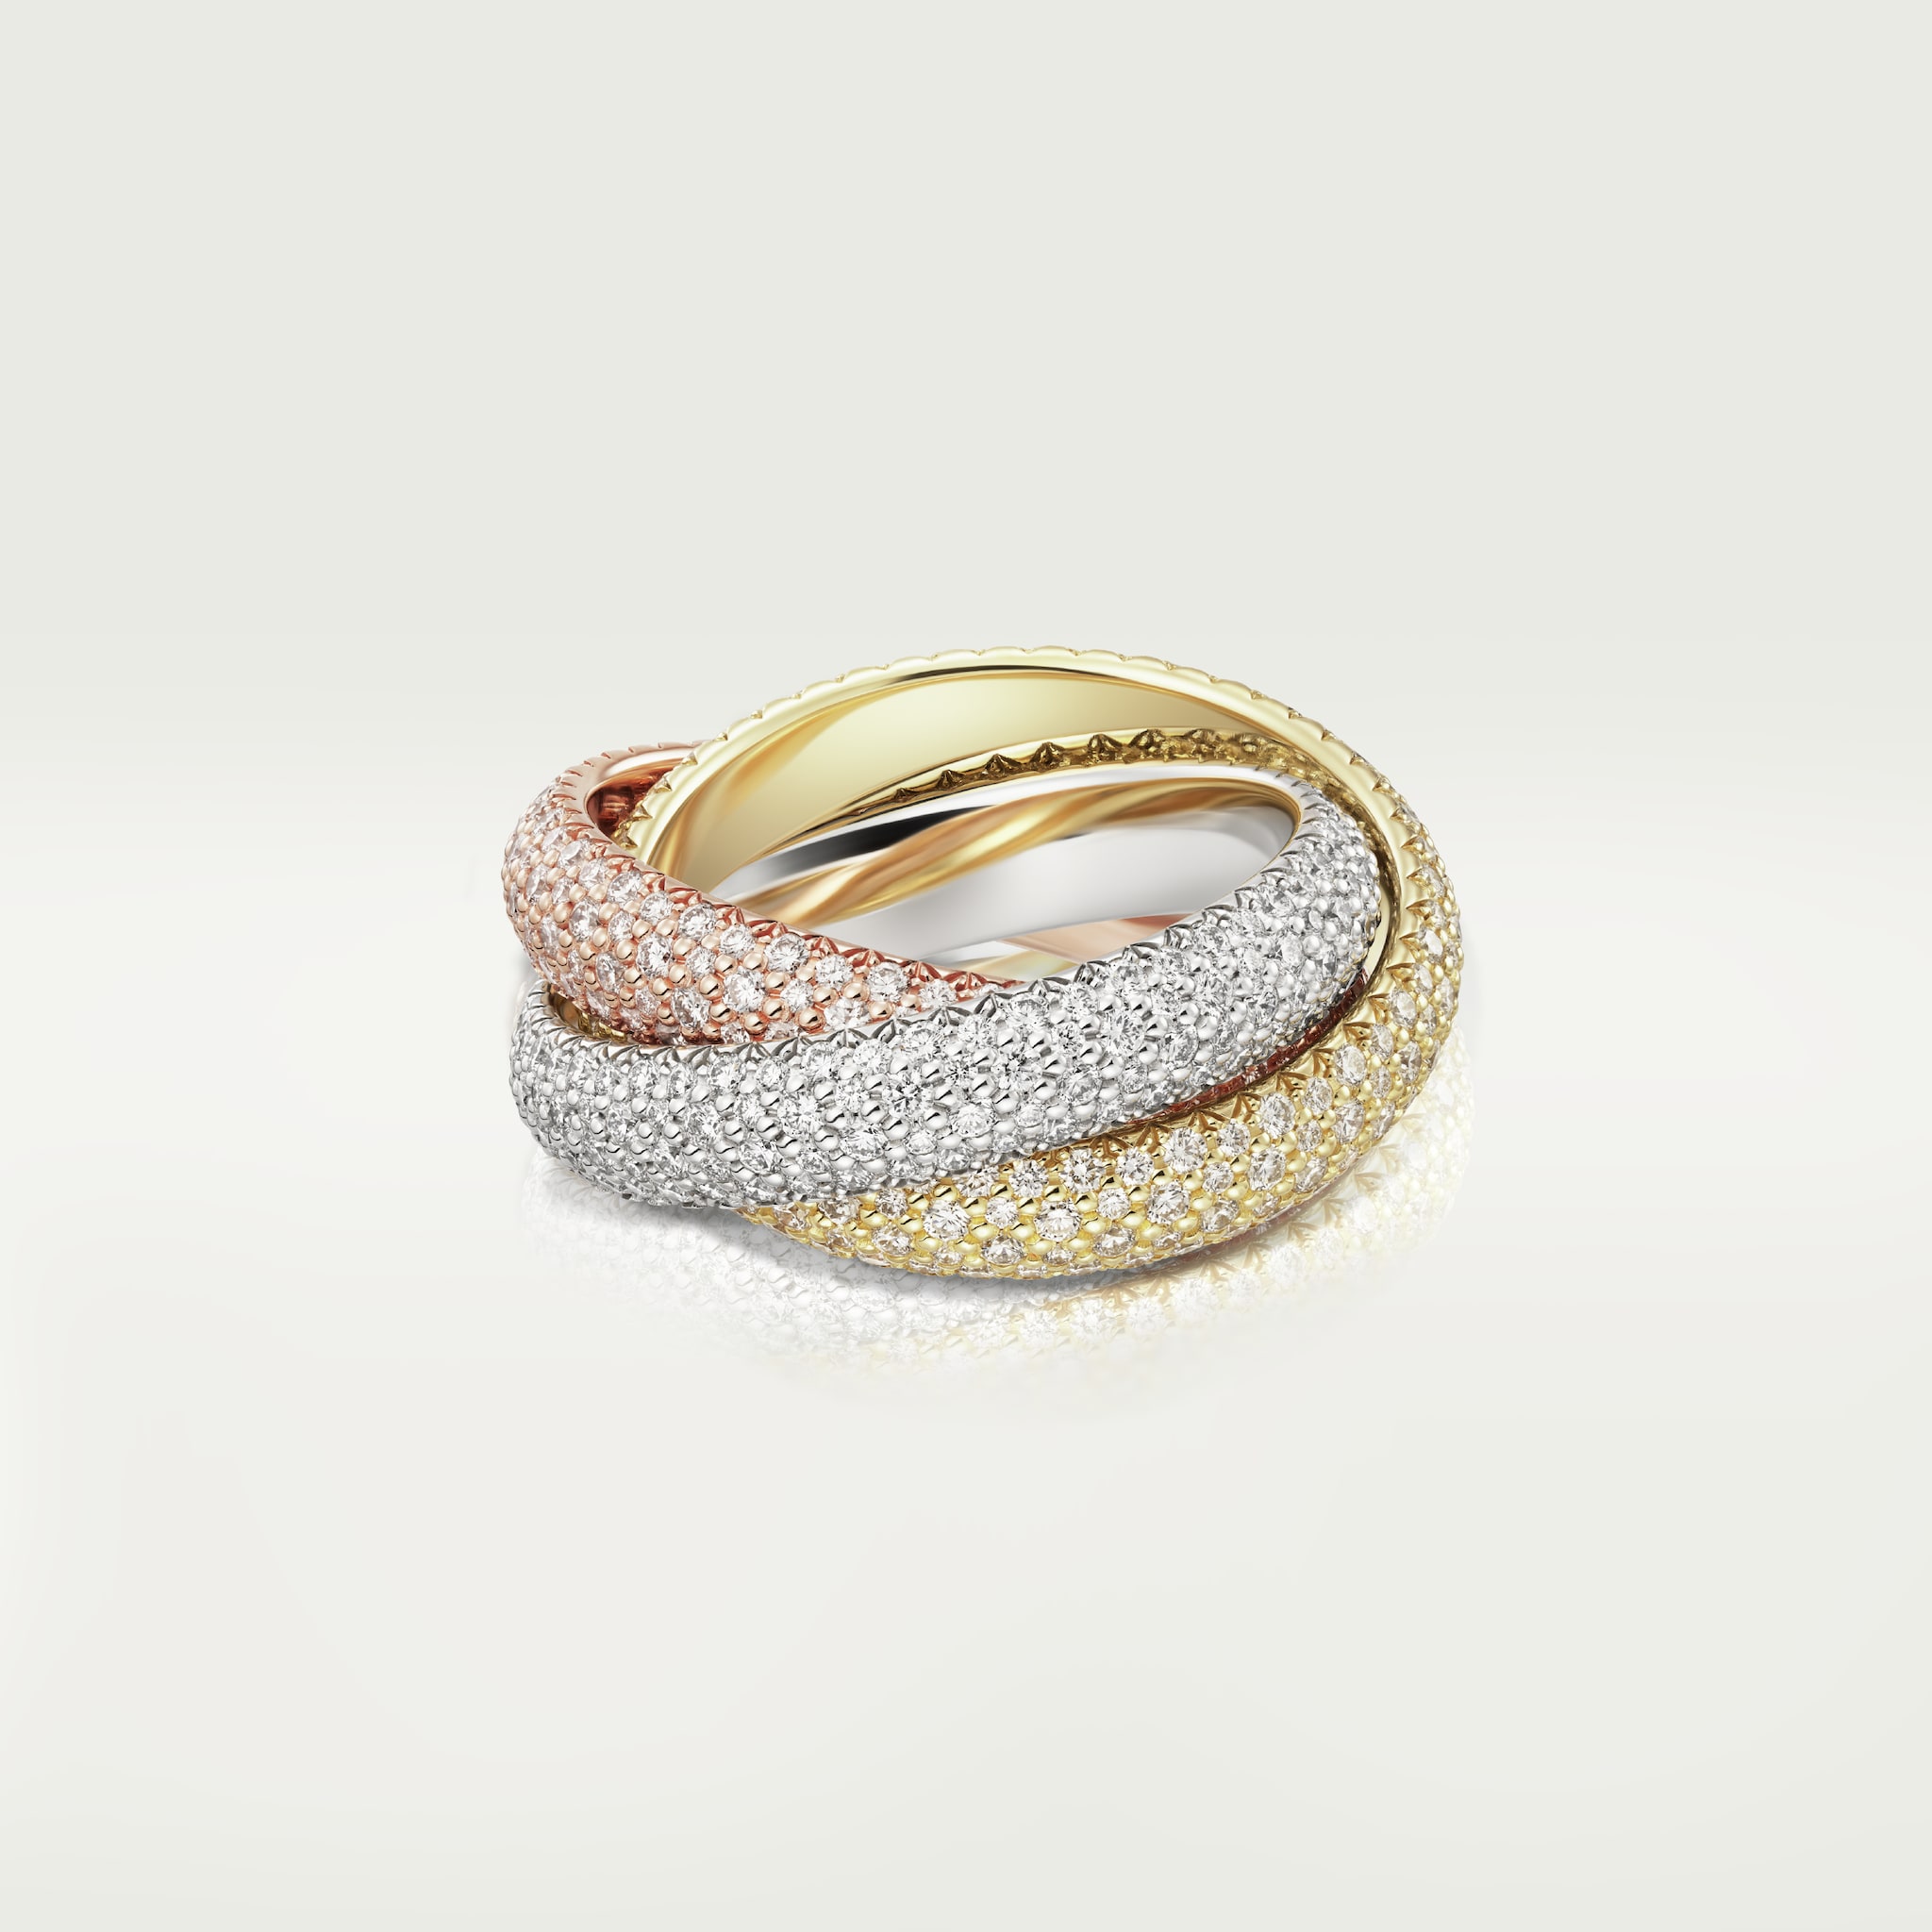 CRB4236000 - Classic Trinity ring - White gold, yellow gold, rose gold,  diamonds - Cartier